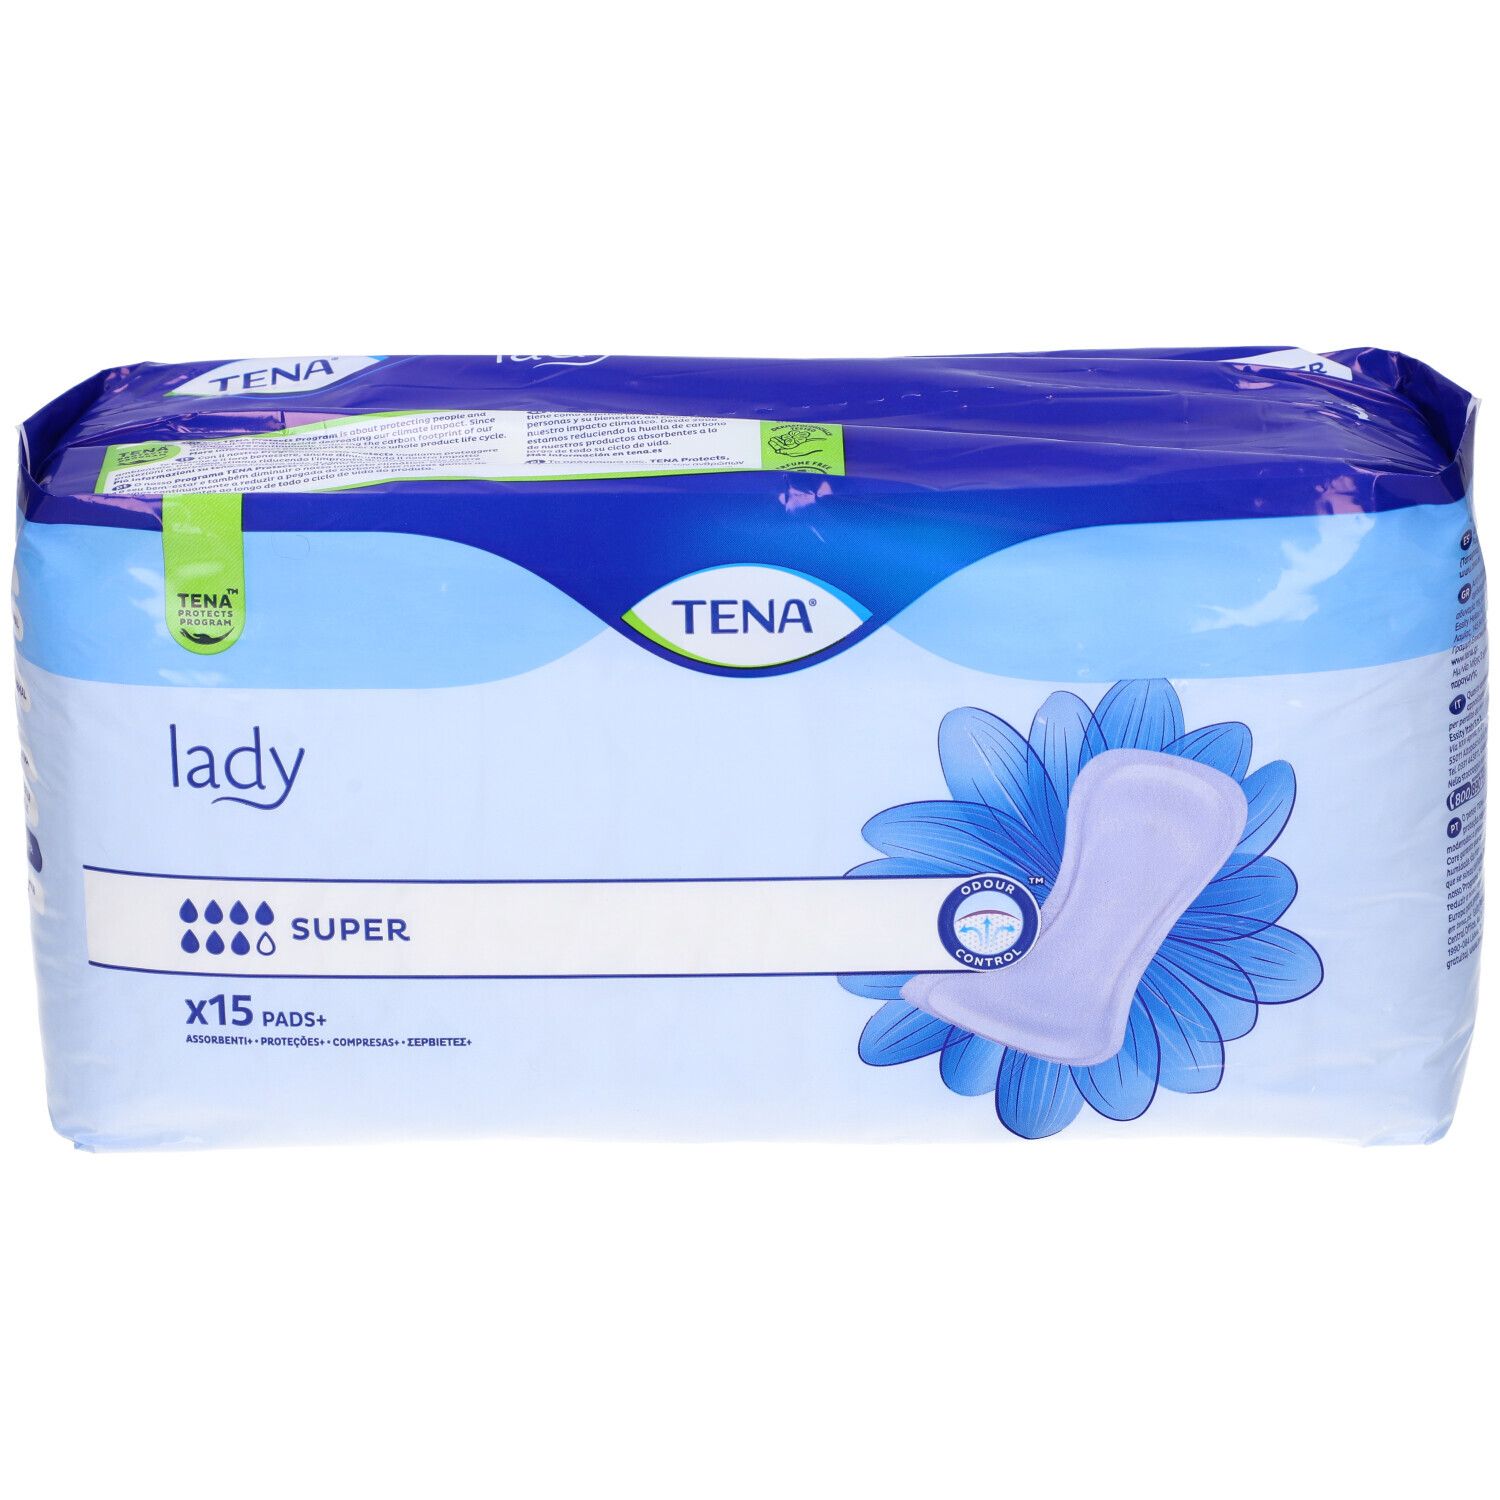 TENA Incontinence & Postpartum Underwear for Women, Super Plus Absorbency -  Large - 64 Count